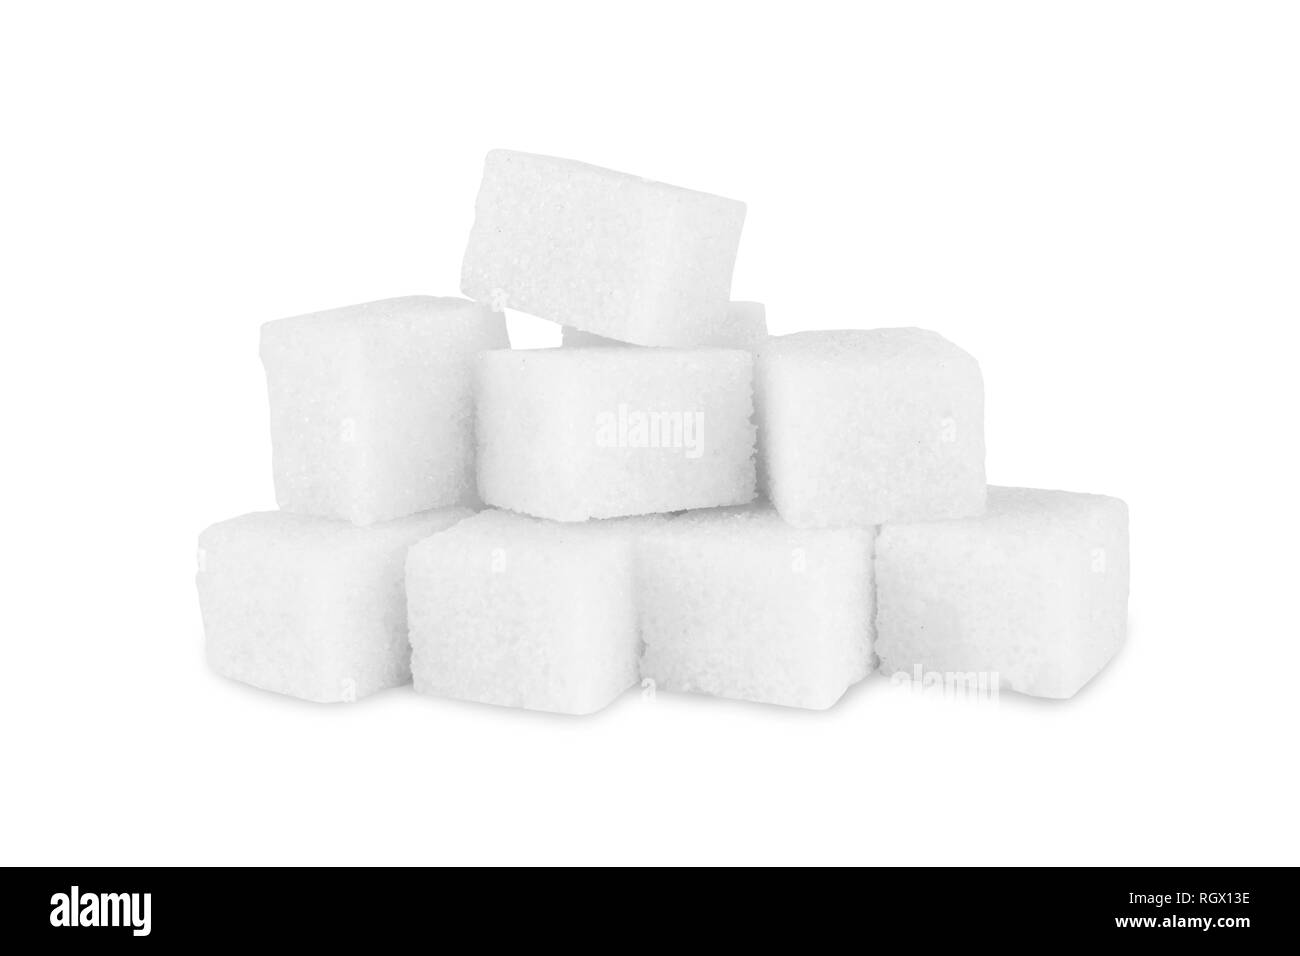 Pile of sugar lumps, isolated on a white background Stock Photo